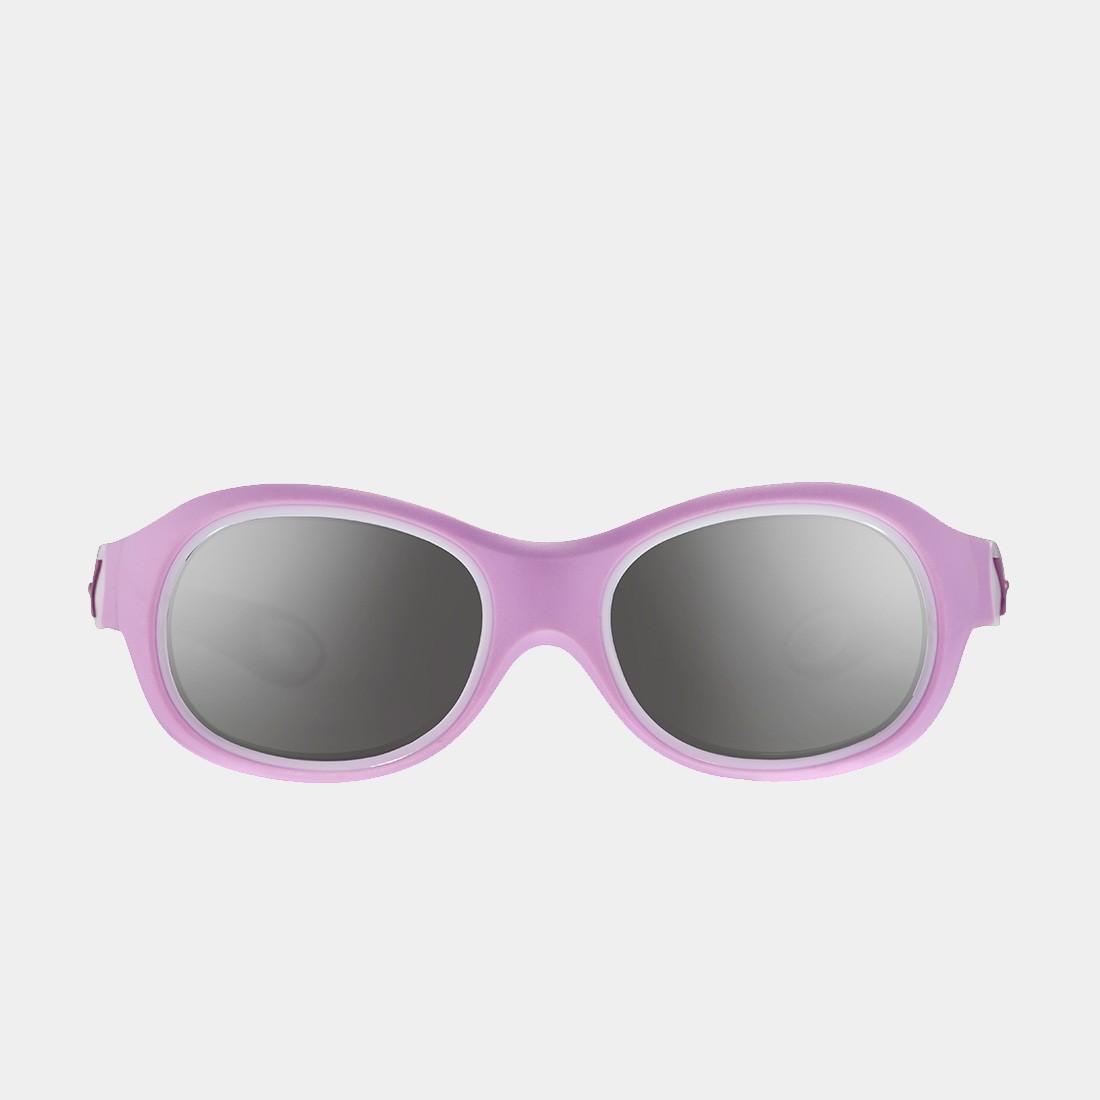 cebe-s-mile-goggles-junior-extra-extra-small-violet